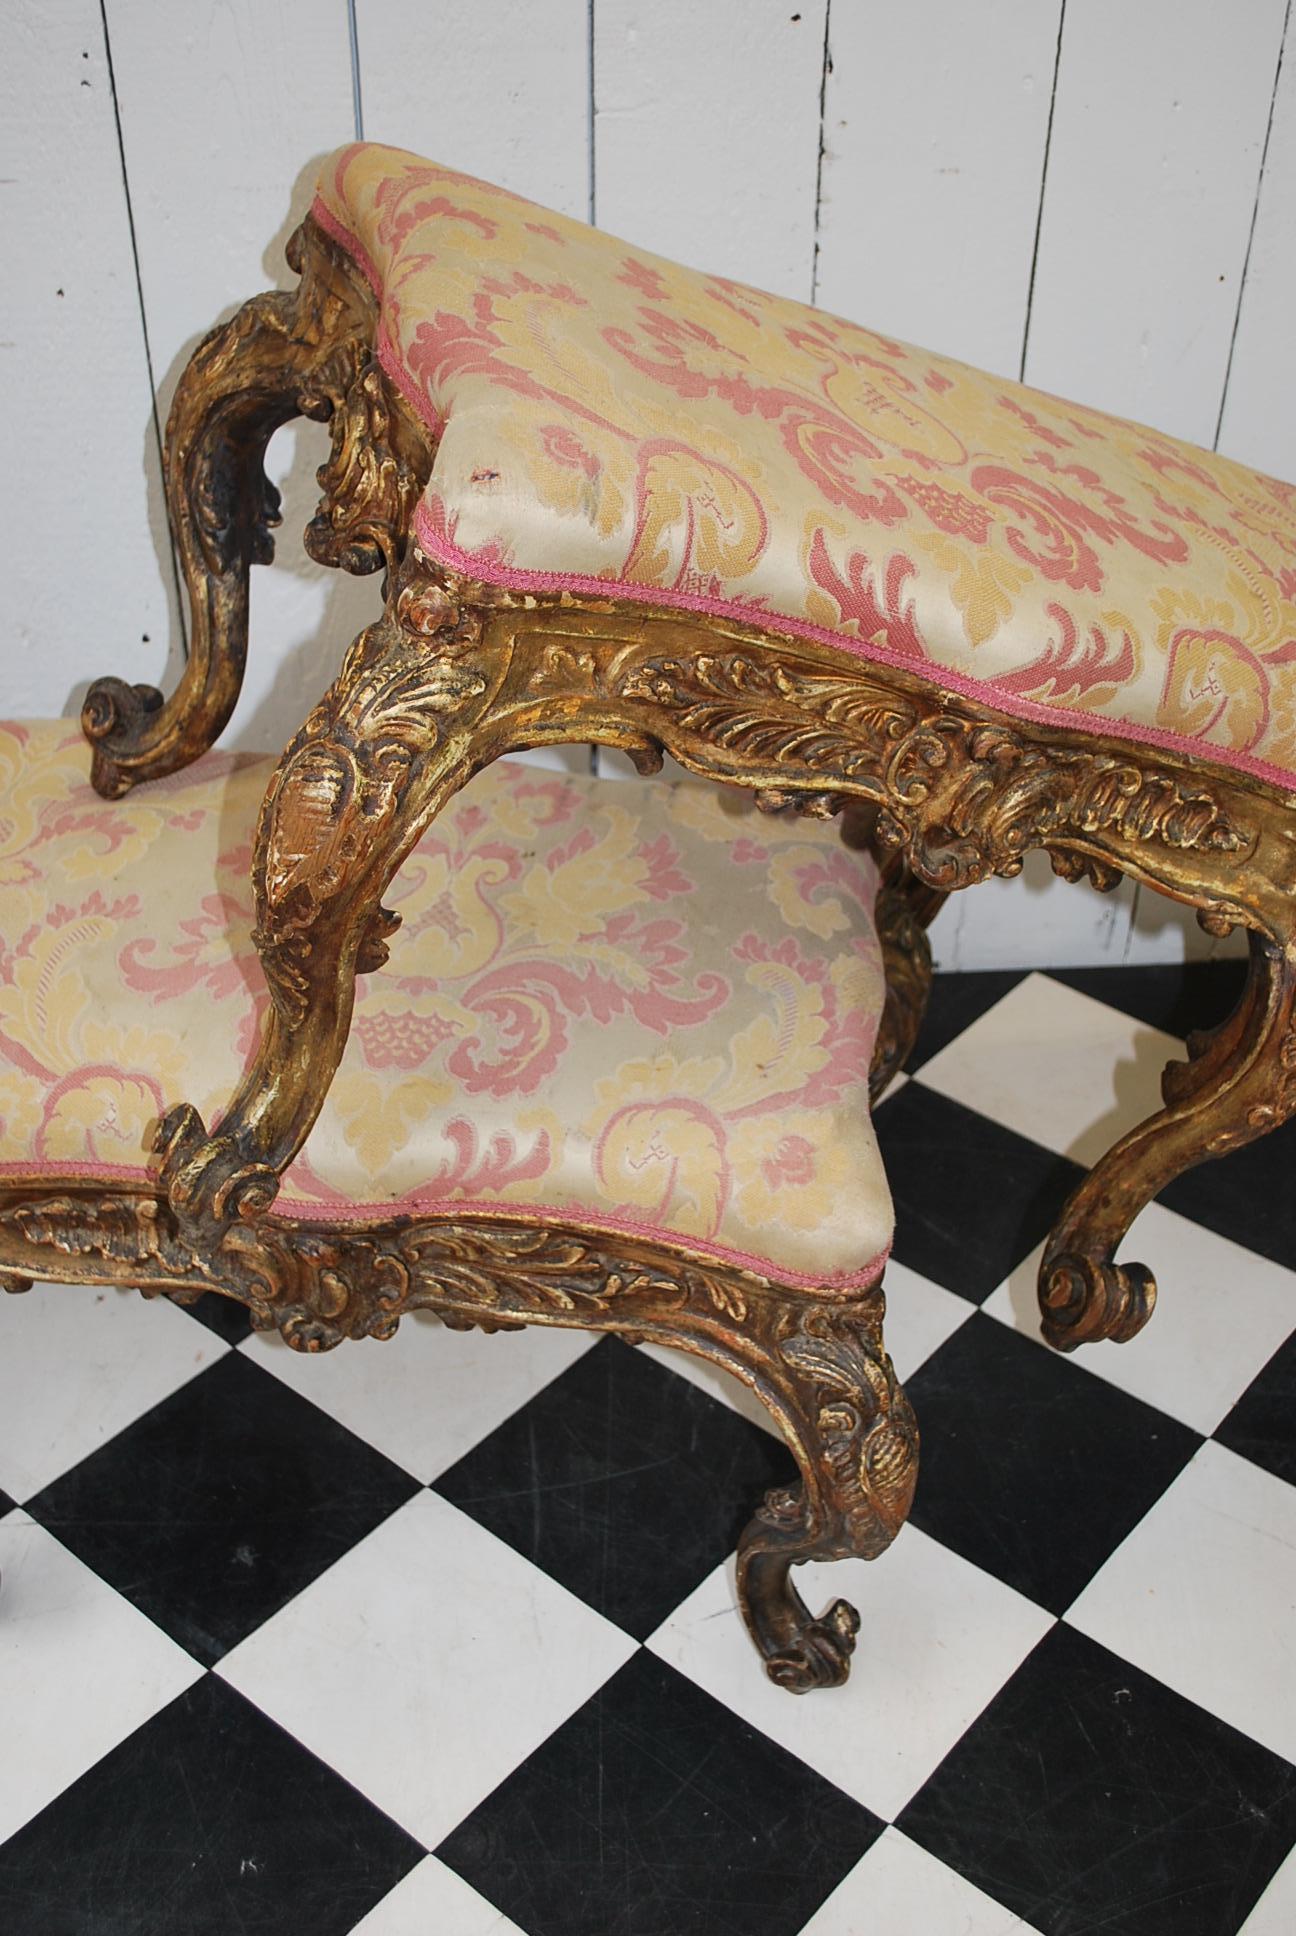 A superb pair of rare Italian carved giltwood Rococo stools, standing on cabriole legs terminating on scroll feet. Beautifully embellished in deep carving on all sides, with serpentine shaped overstuffed upholstered seats.

  